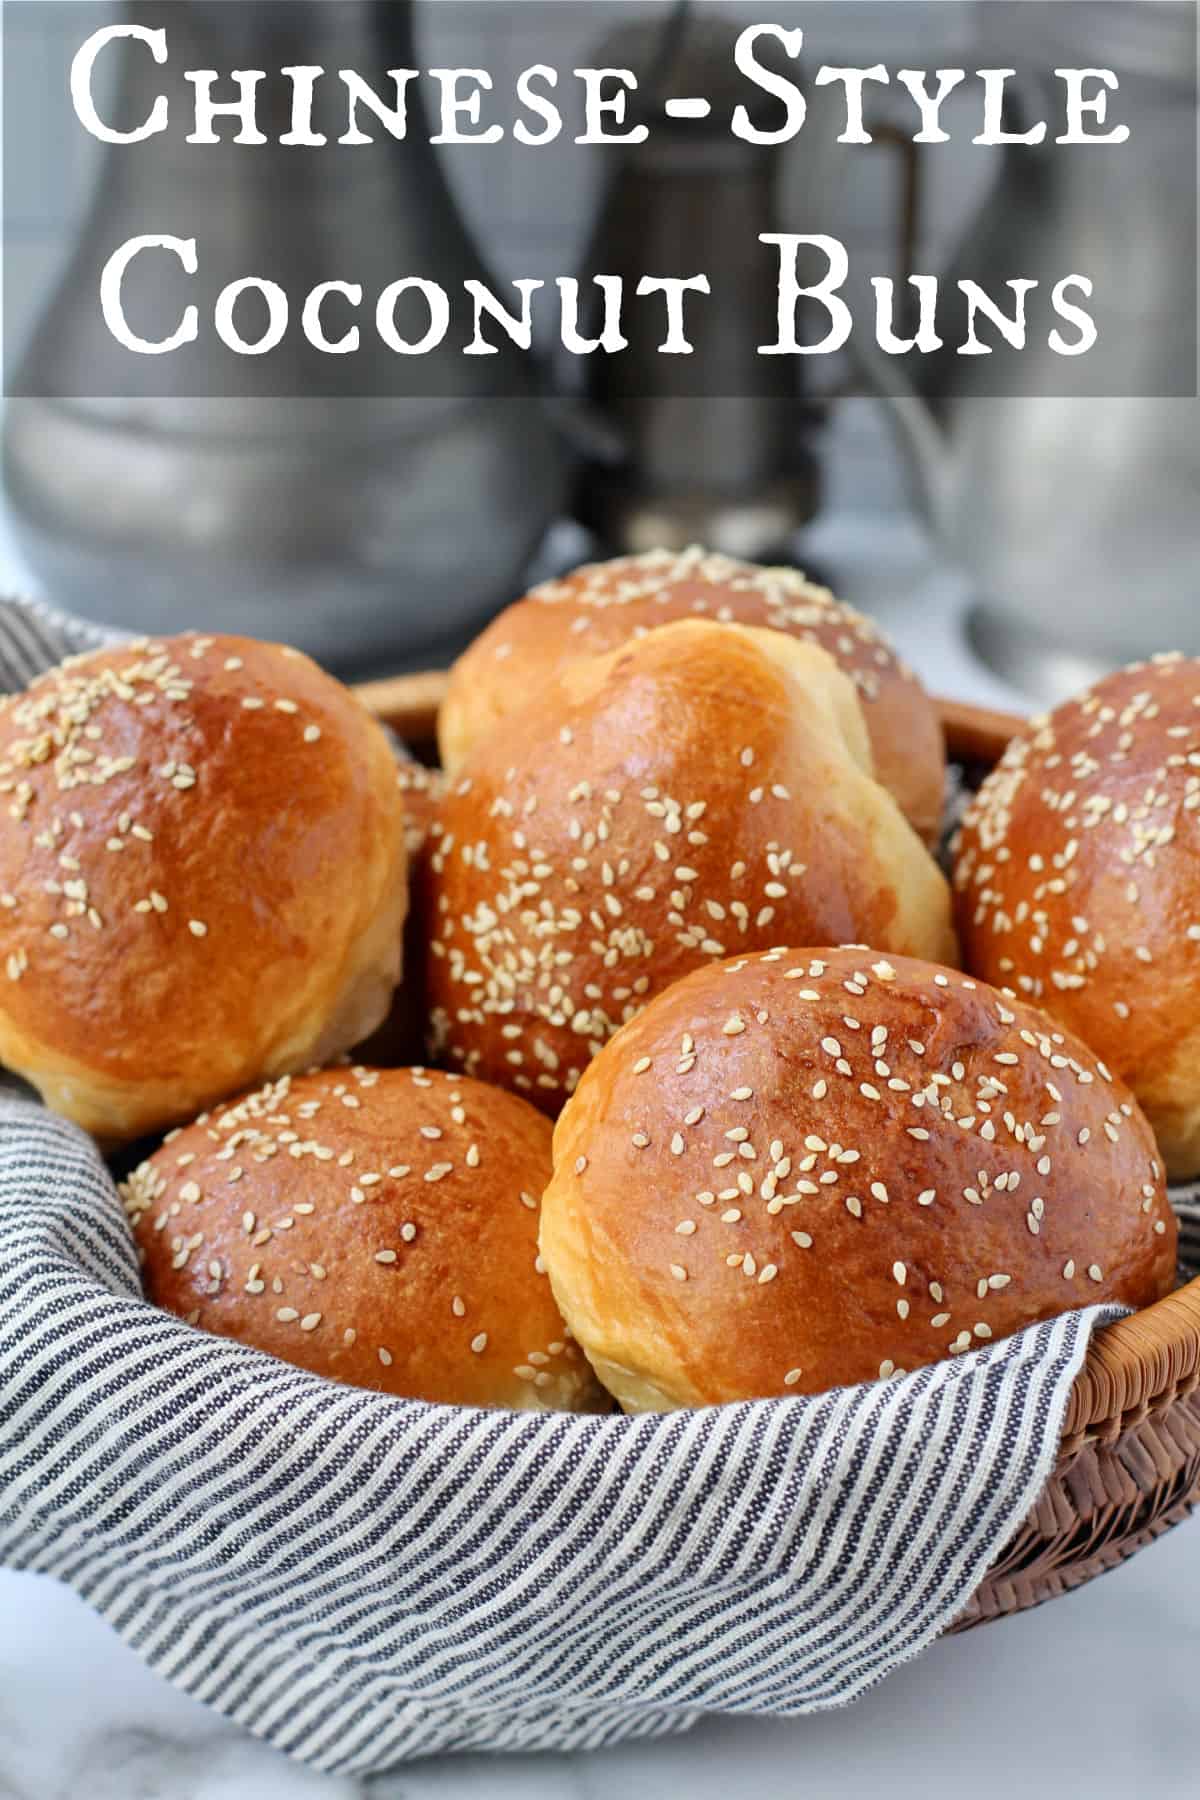 Chinese Coconut Buns in a basket.